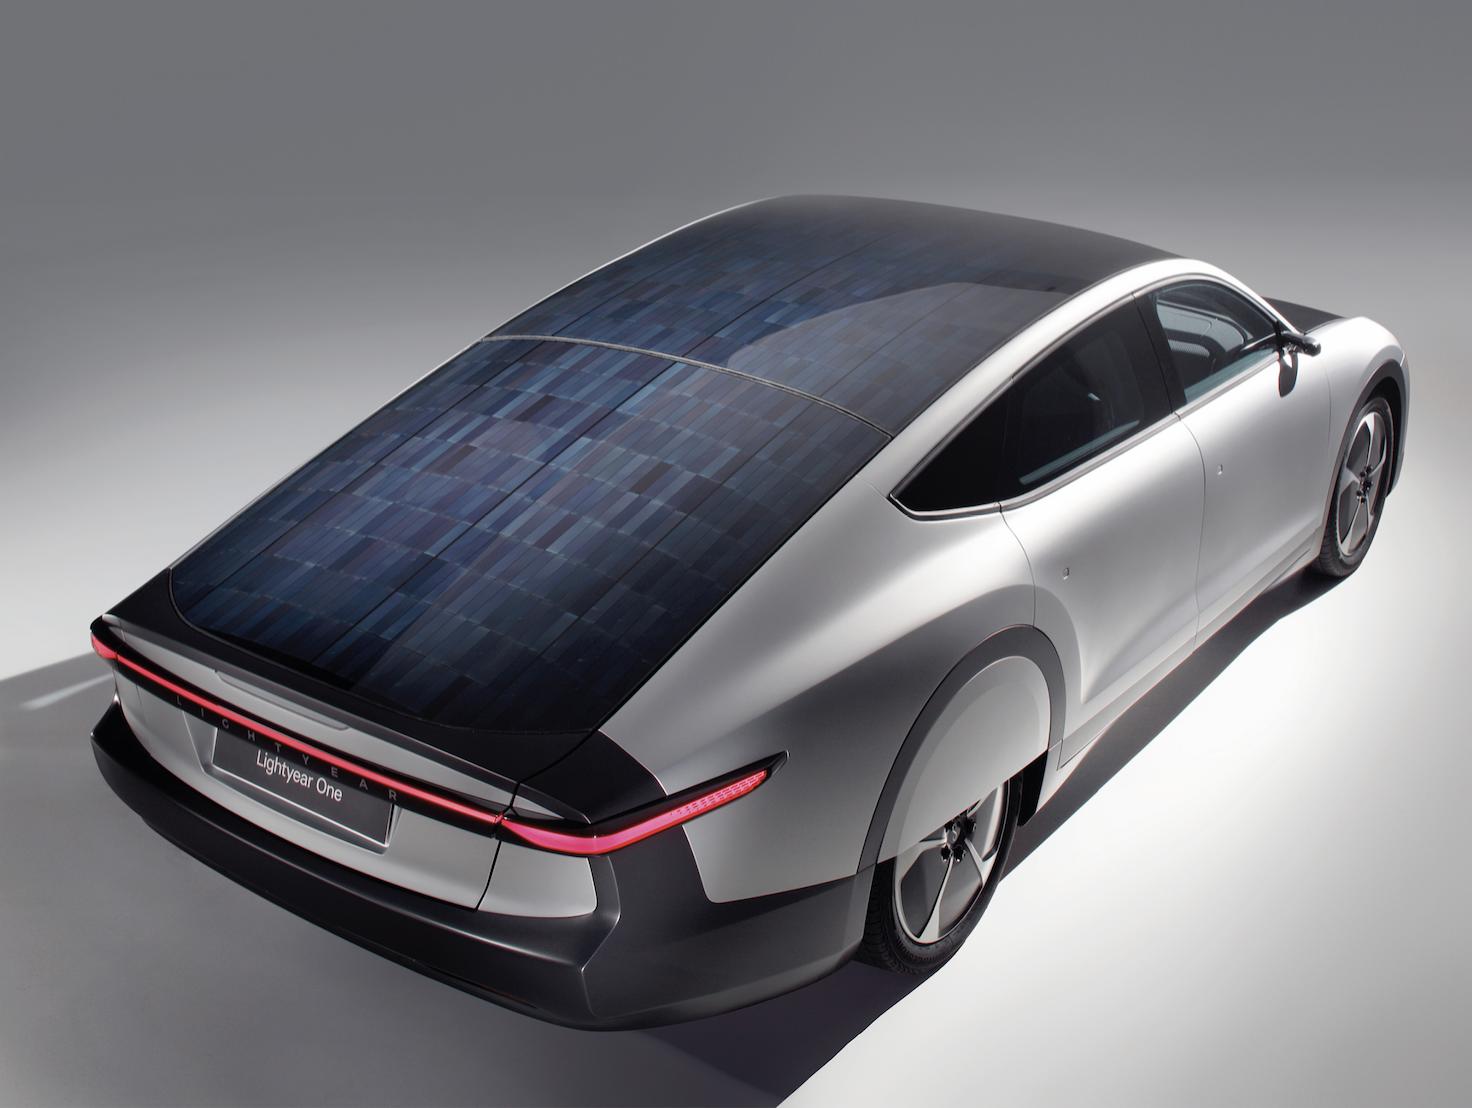 Lightyear Solar Car gets TNO's assistance in curving solar panels